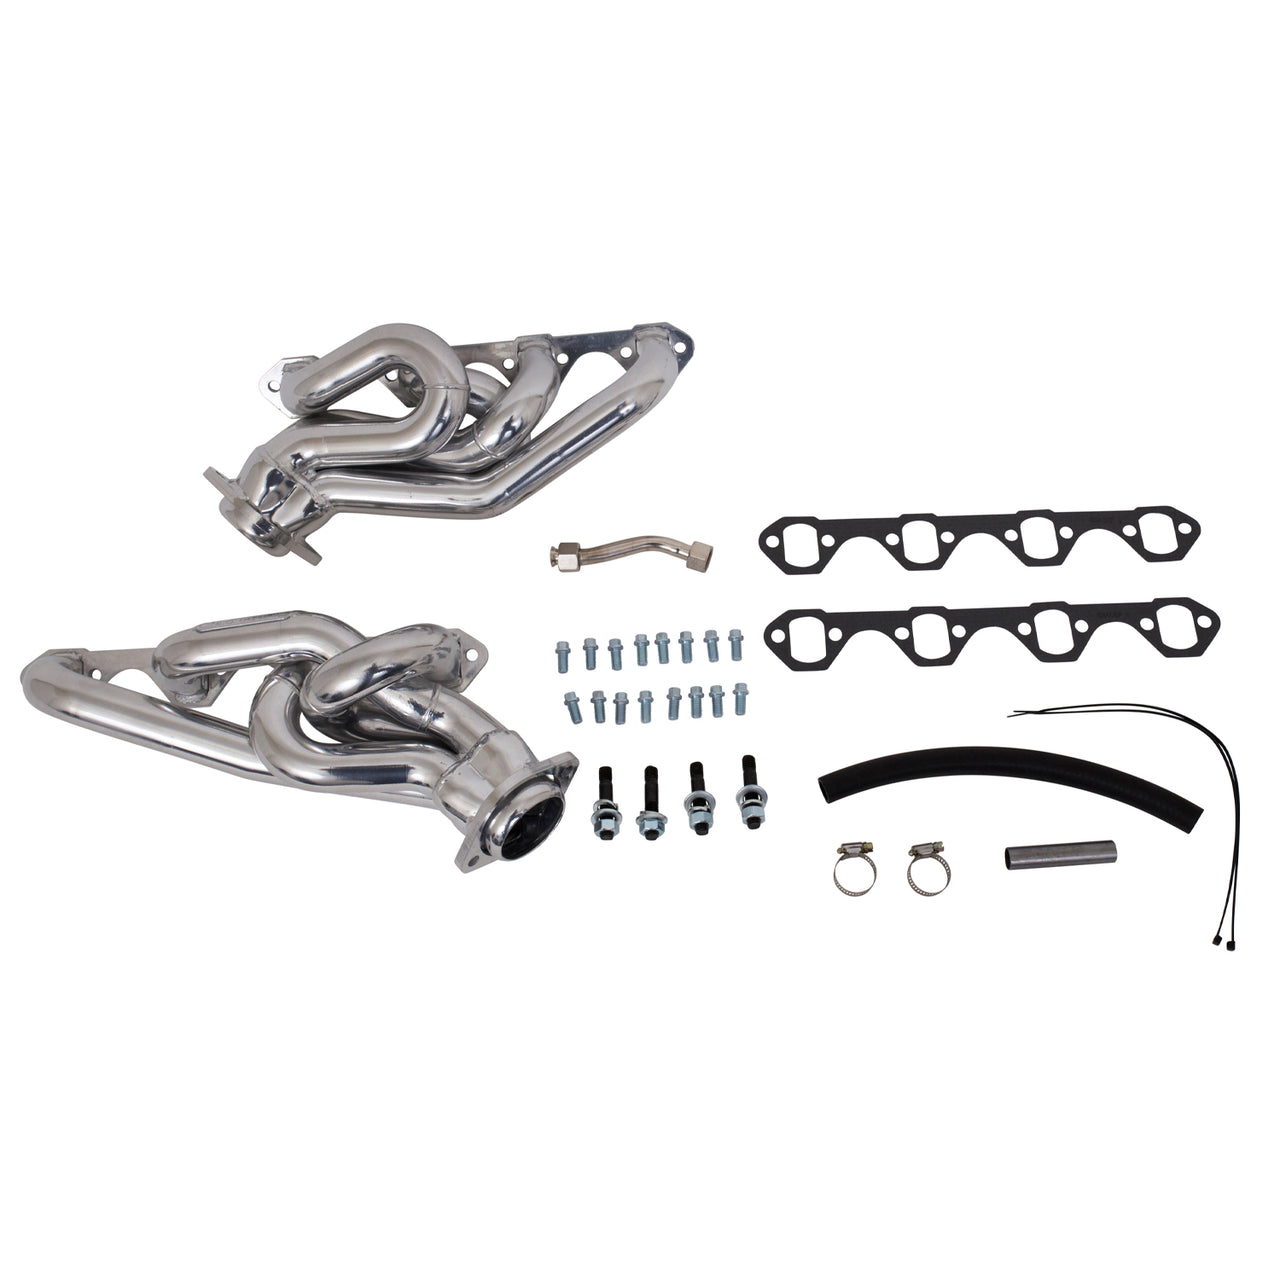 1994-1995 MUSTANG 5.0 1-5/8 EQUAL LENGTH SHORTY HEADERS (POLISHED SILVER CERAMIC)